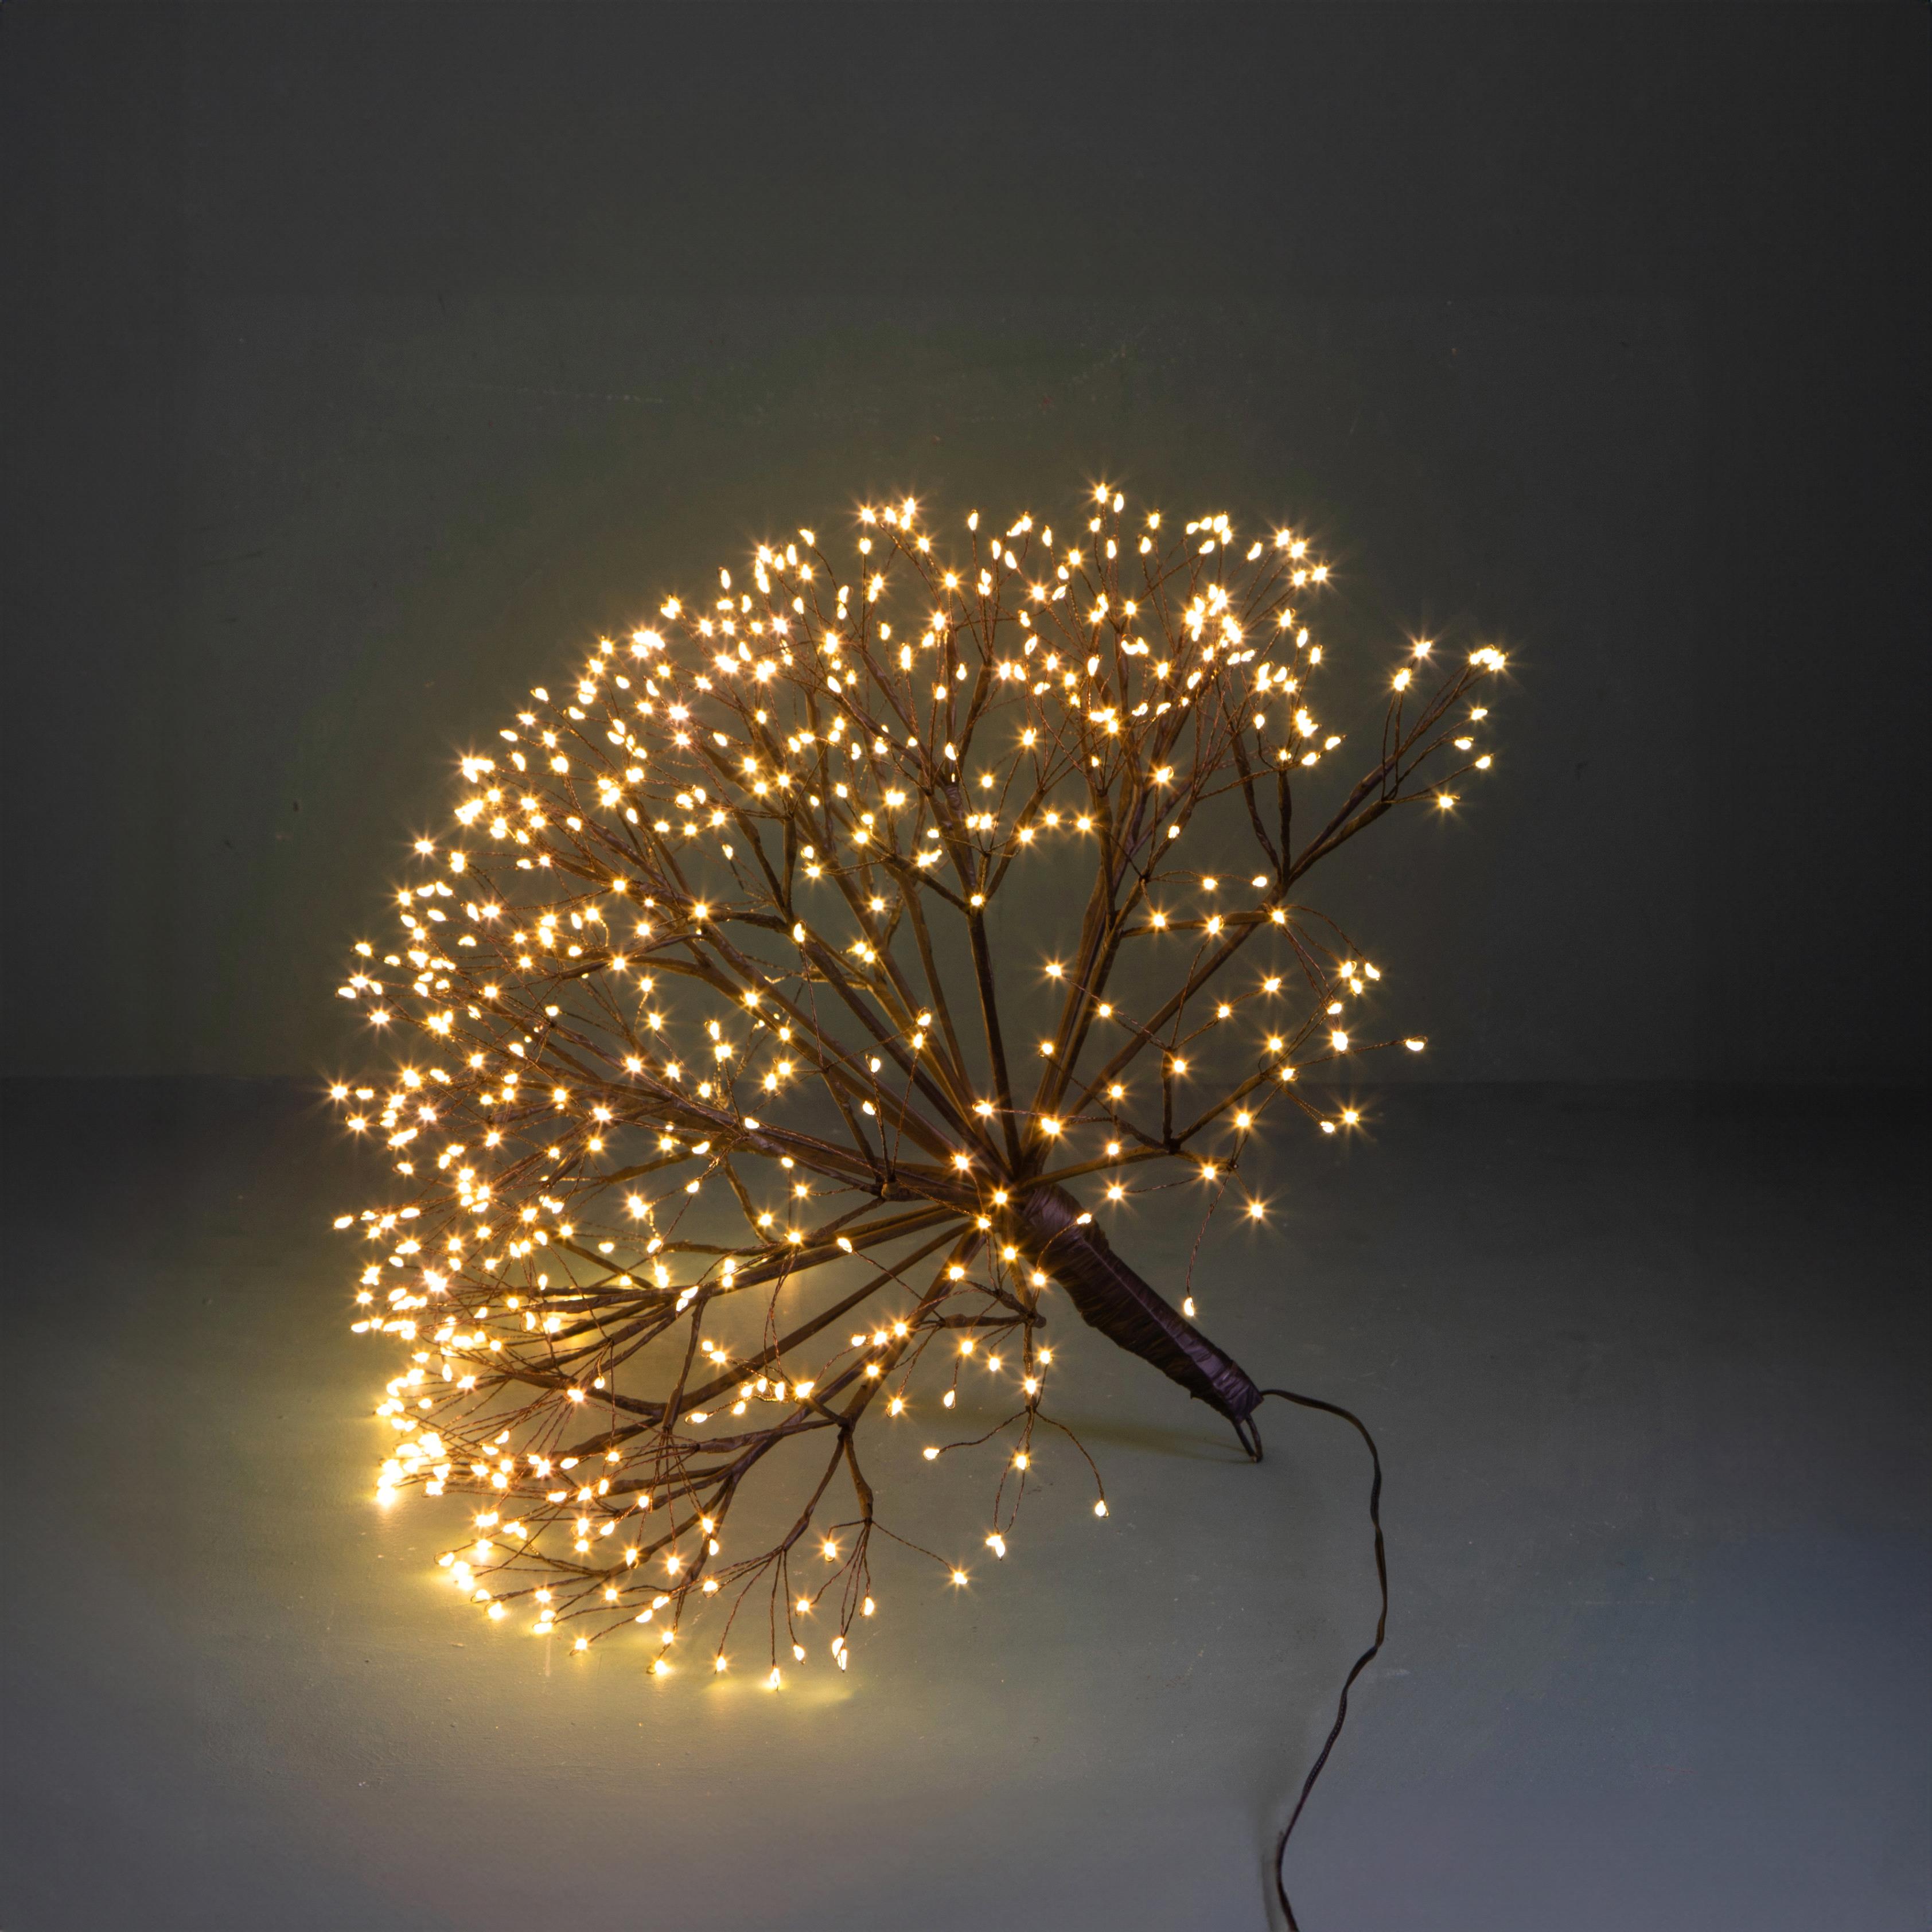 CHRISTMAS ITEMS,TREES OVER 110 CM with anw/out lights,FIORE H.31XD.7 CM C/384 LED DA EST.